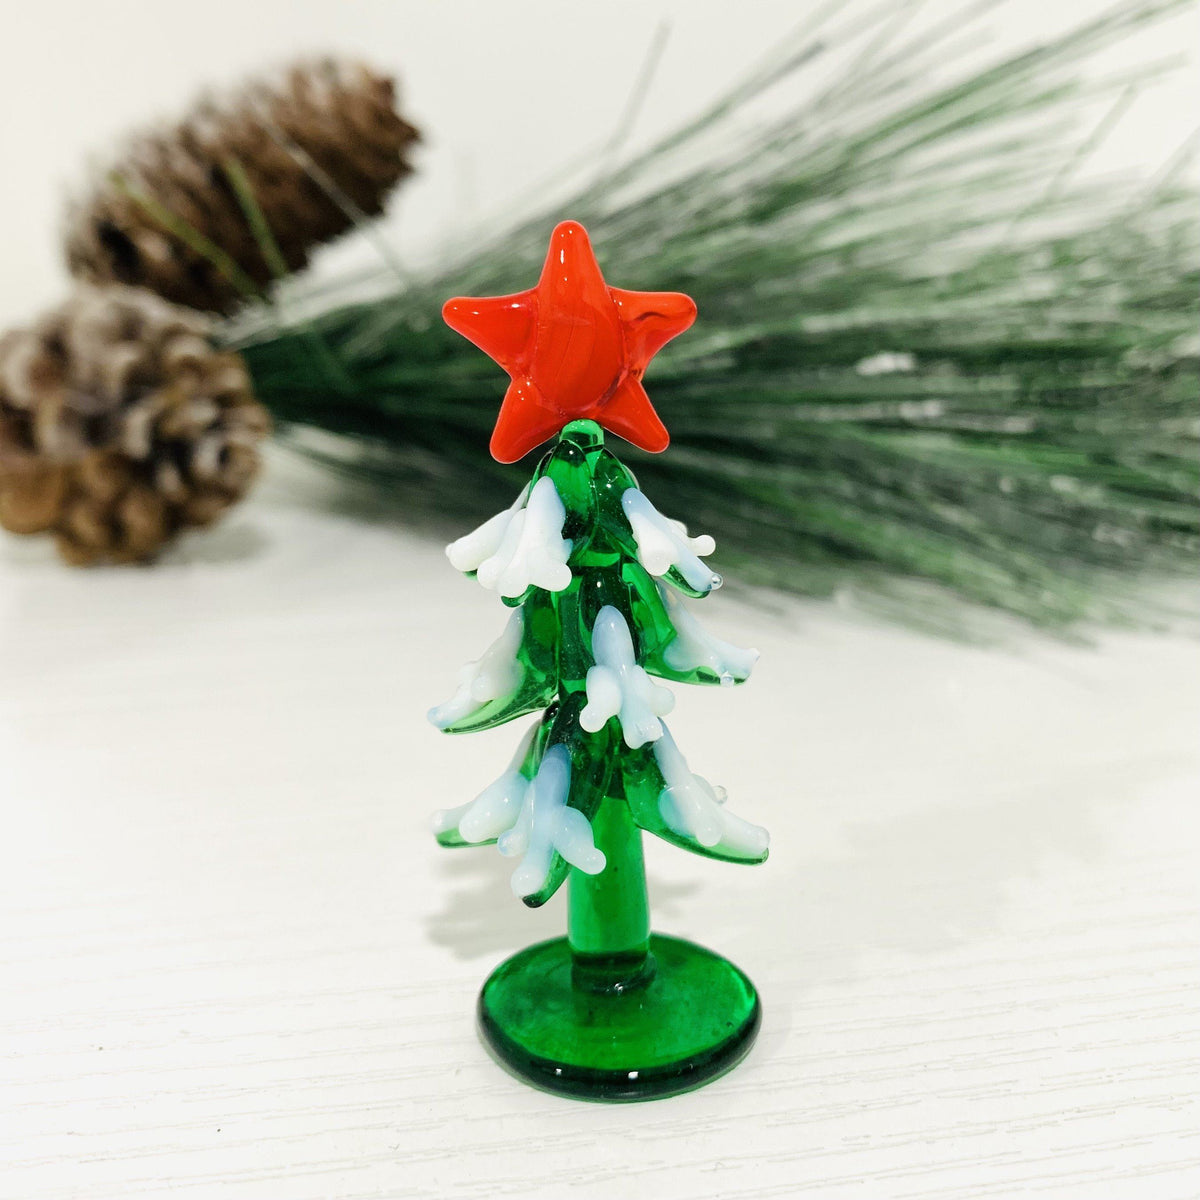 Little Glass Trees, Red Star Miniature - 